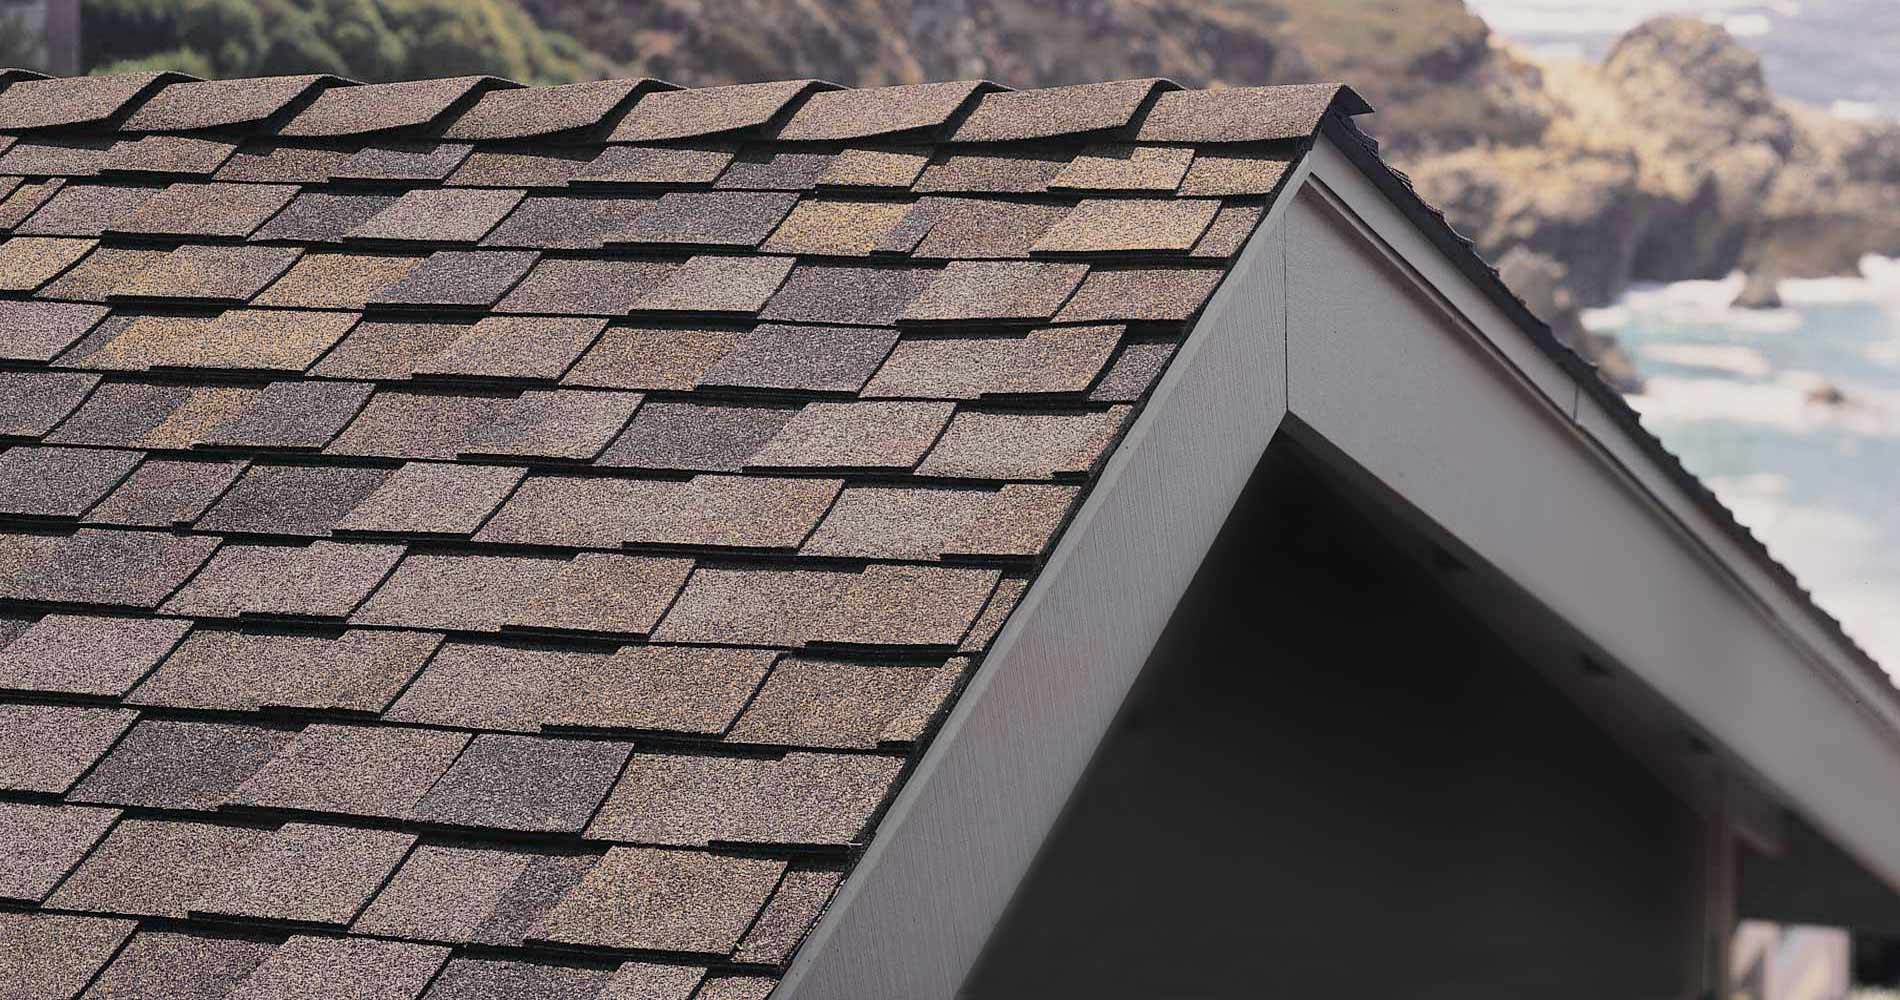 Roofing Contractors in Chatham, NJ 07928